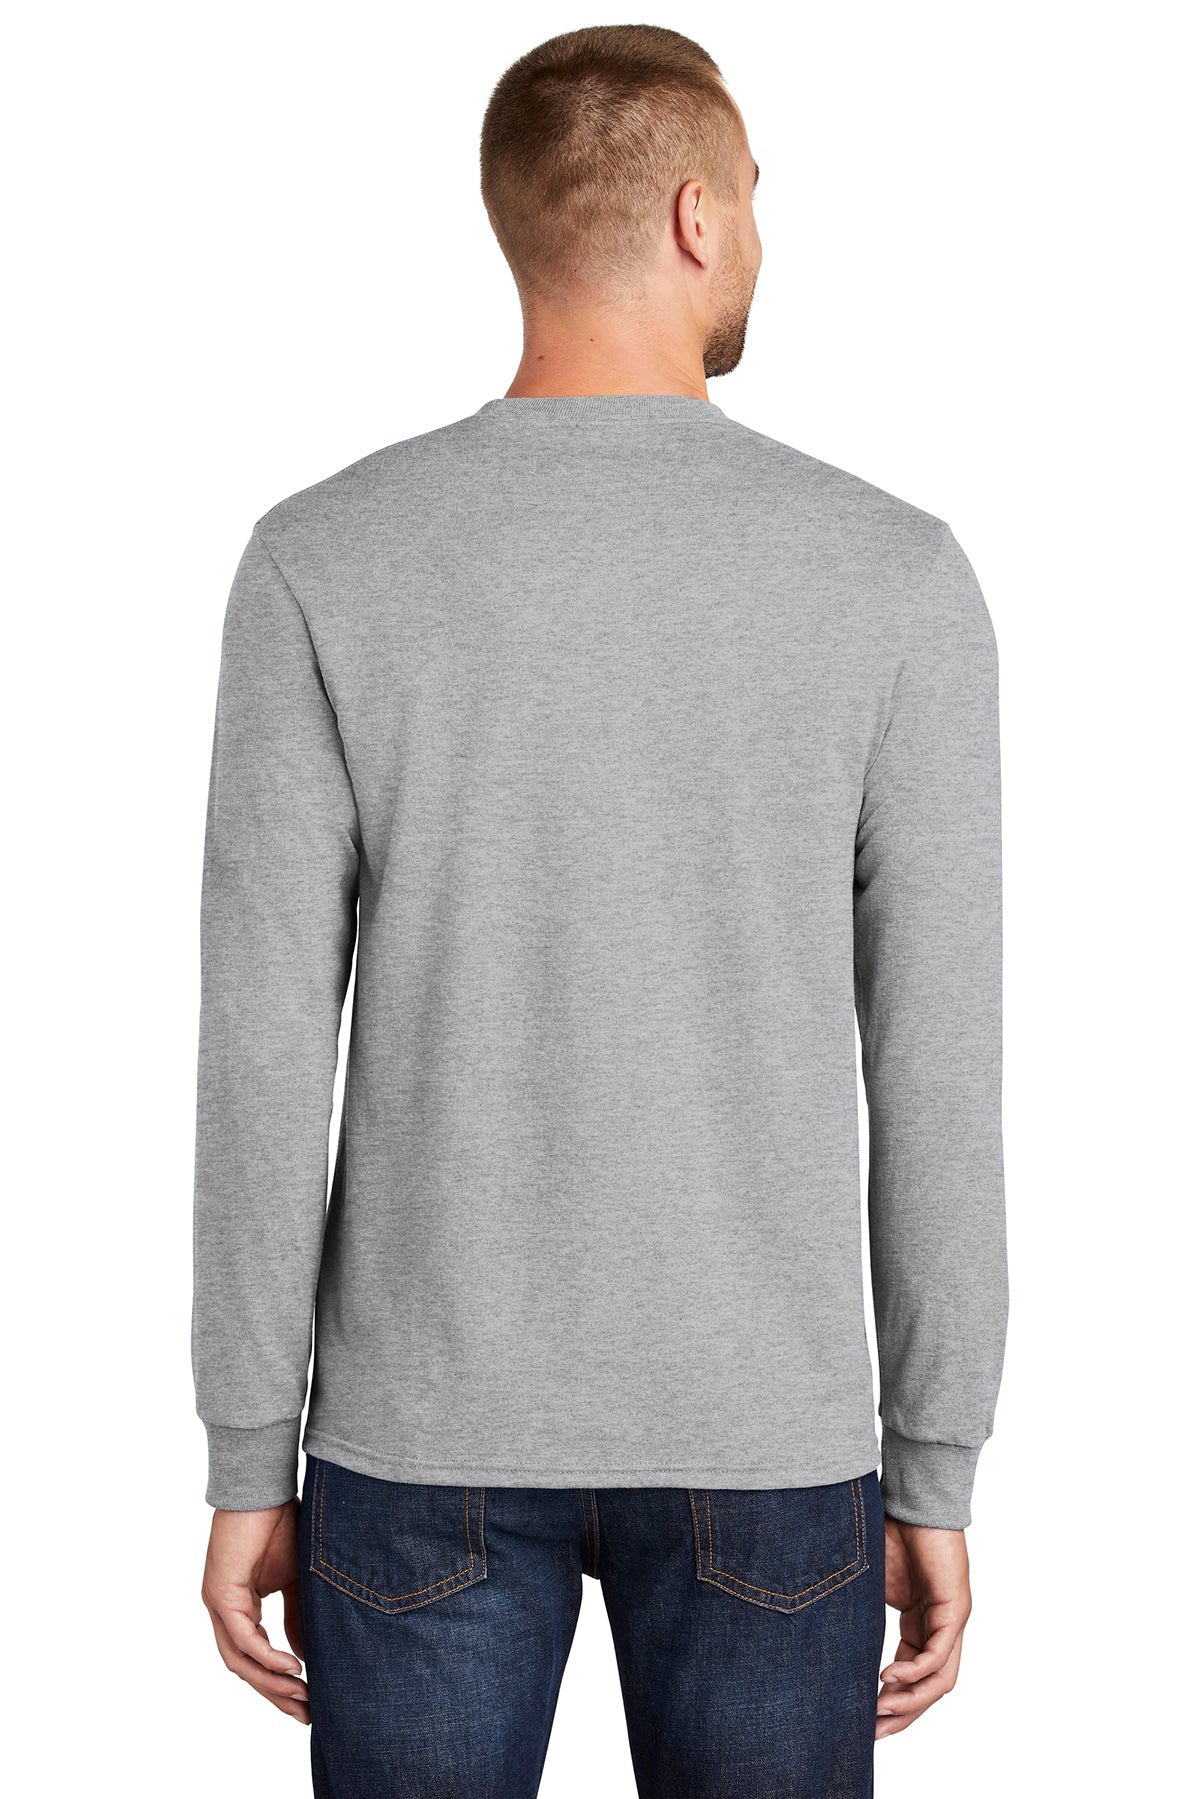 Port & Company Tall Long Sleeve Branded Core Blend Tee's, Ash